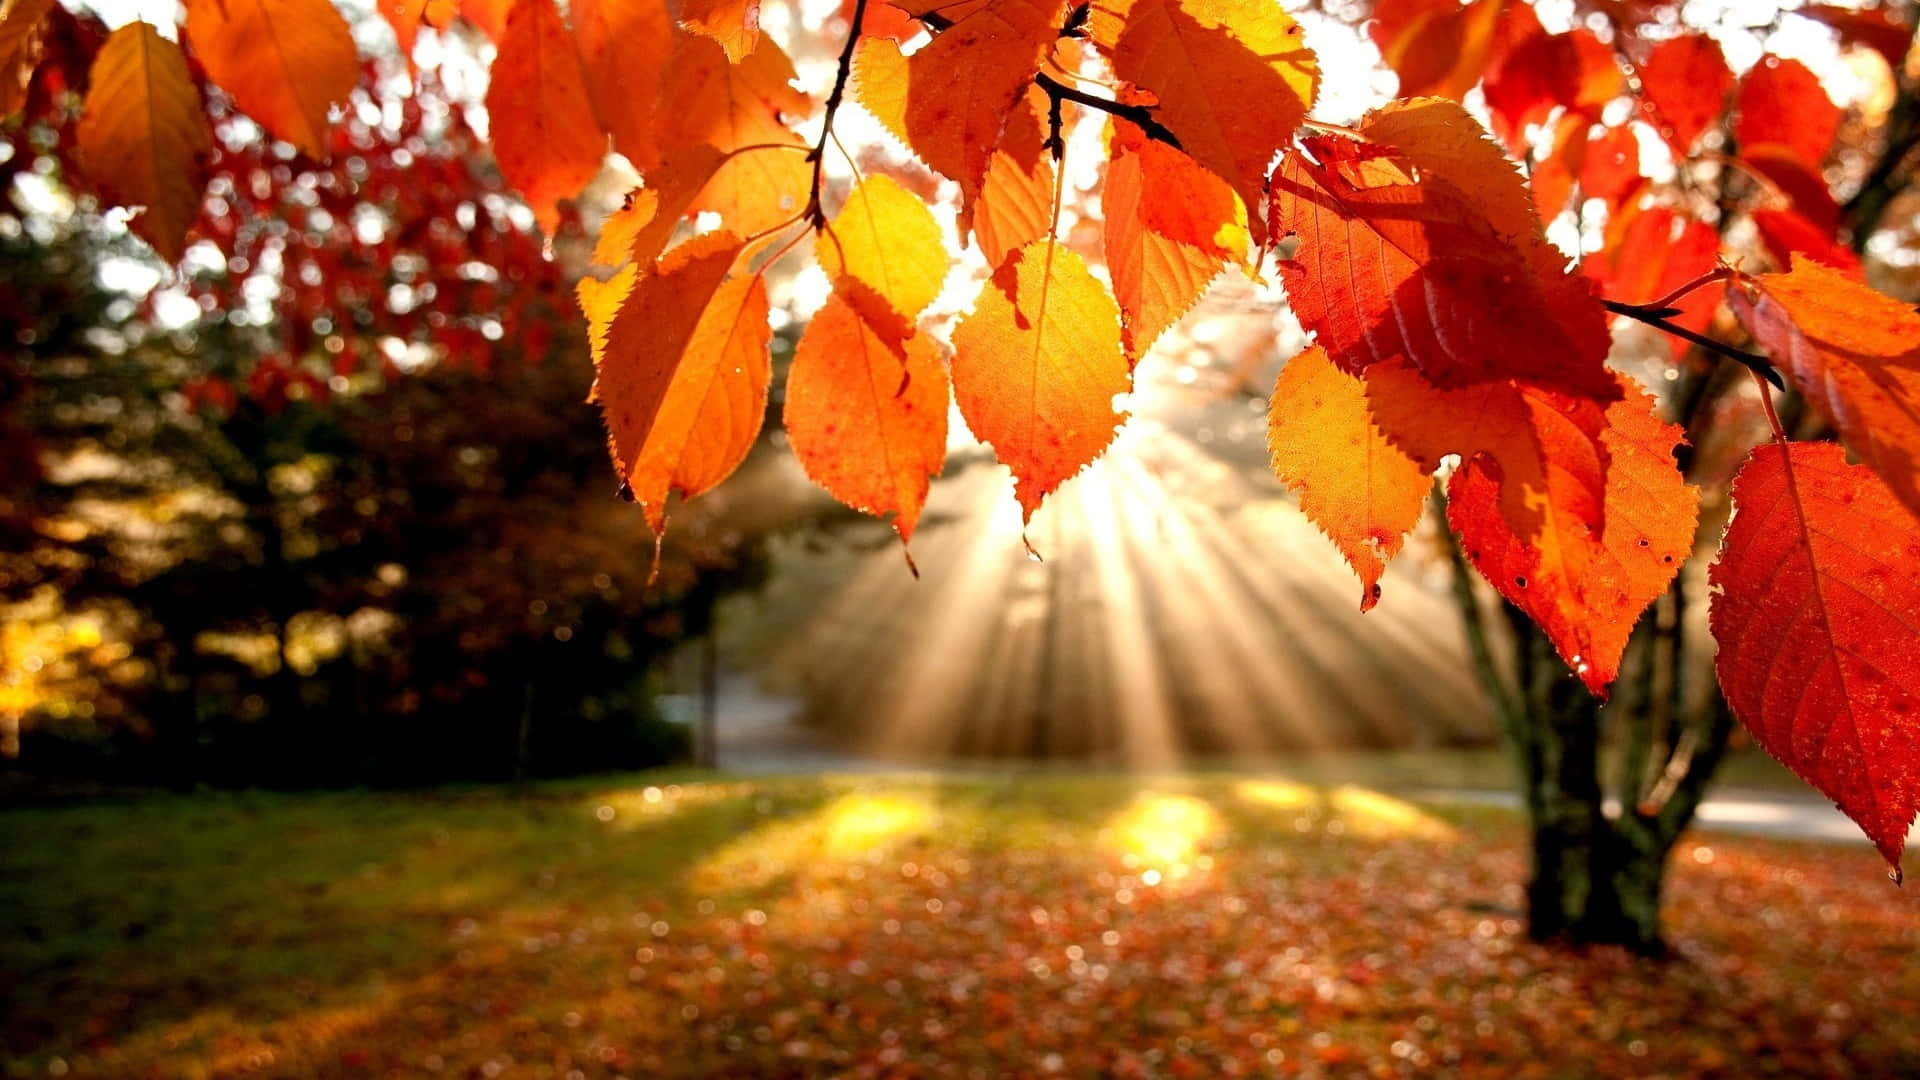 Enjoy the beauty of nature in #coolfall Wallpaper